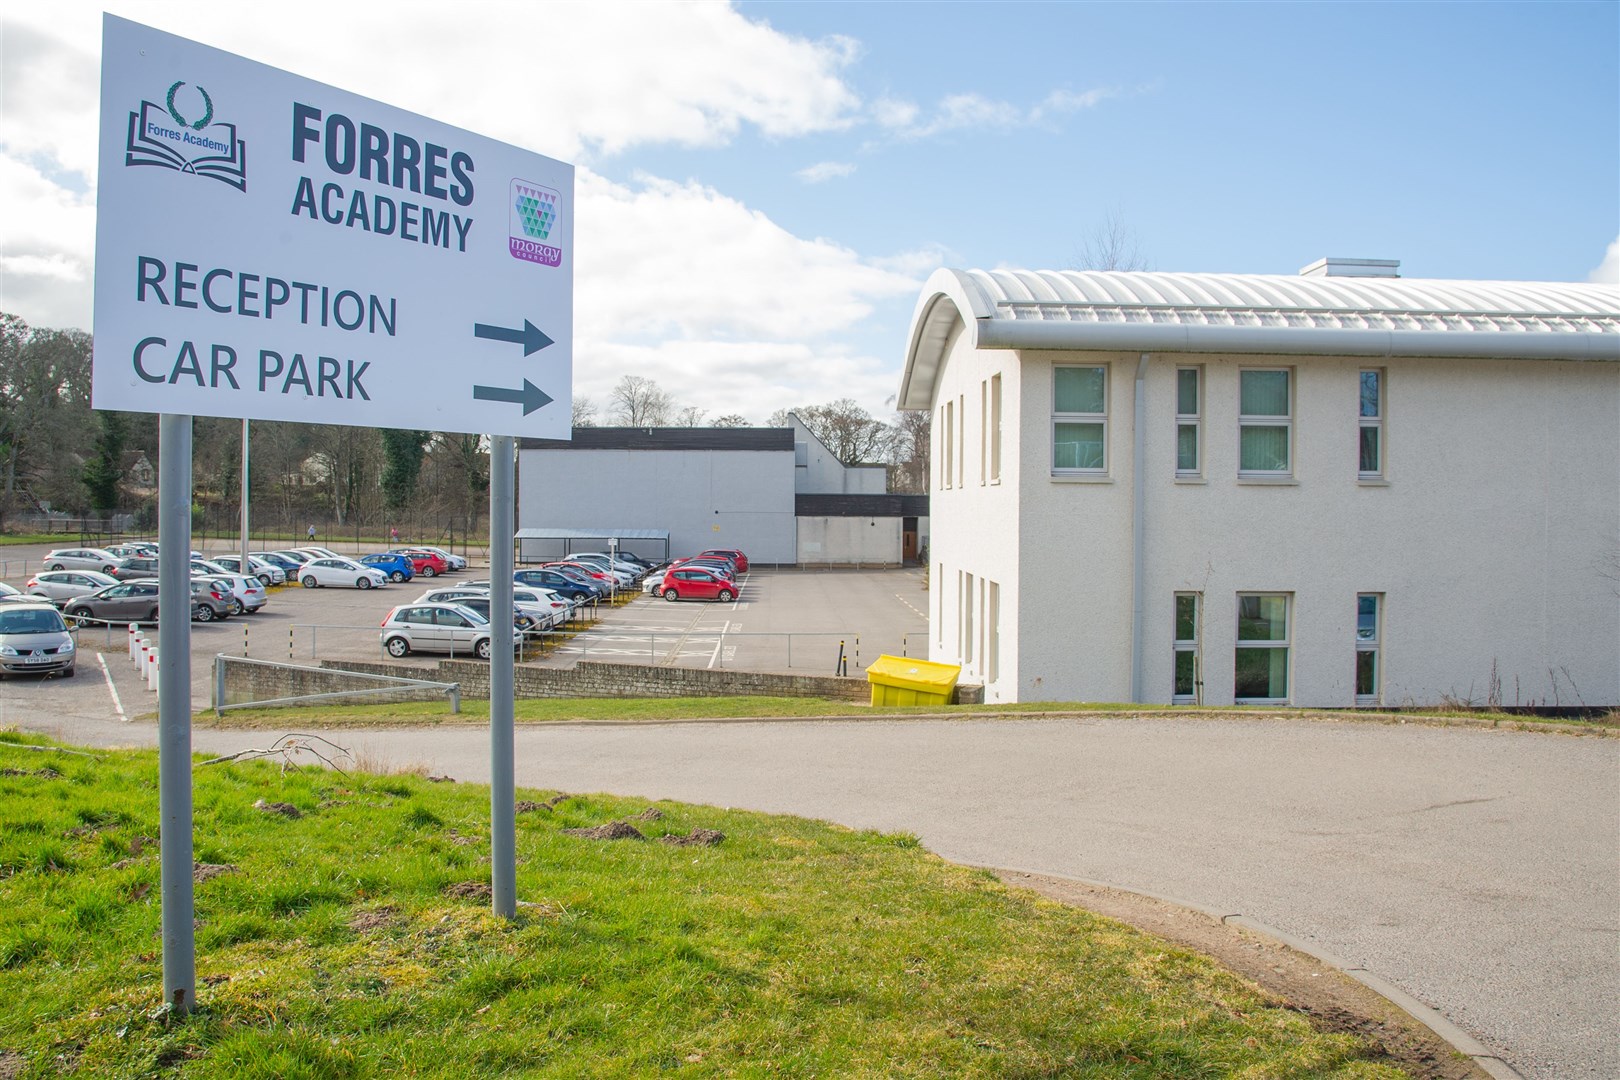 Forres Academy Picture: Daniel Forsyth.